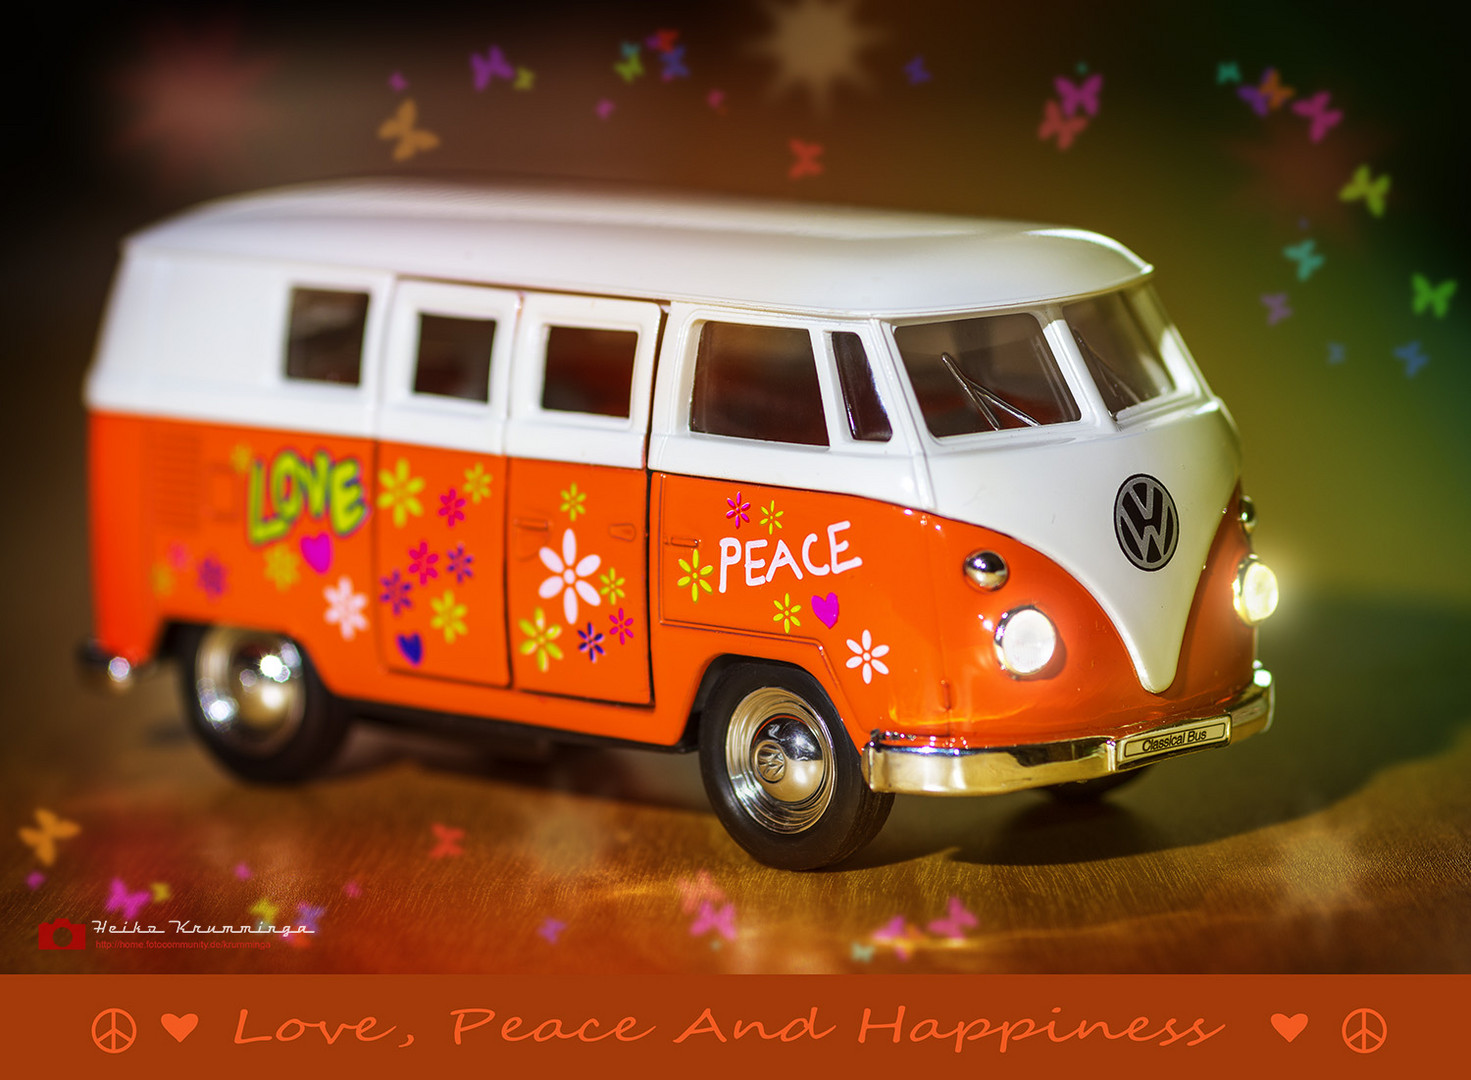 Love, Peace And Happiness